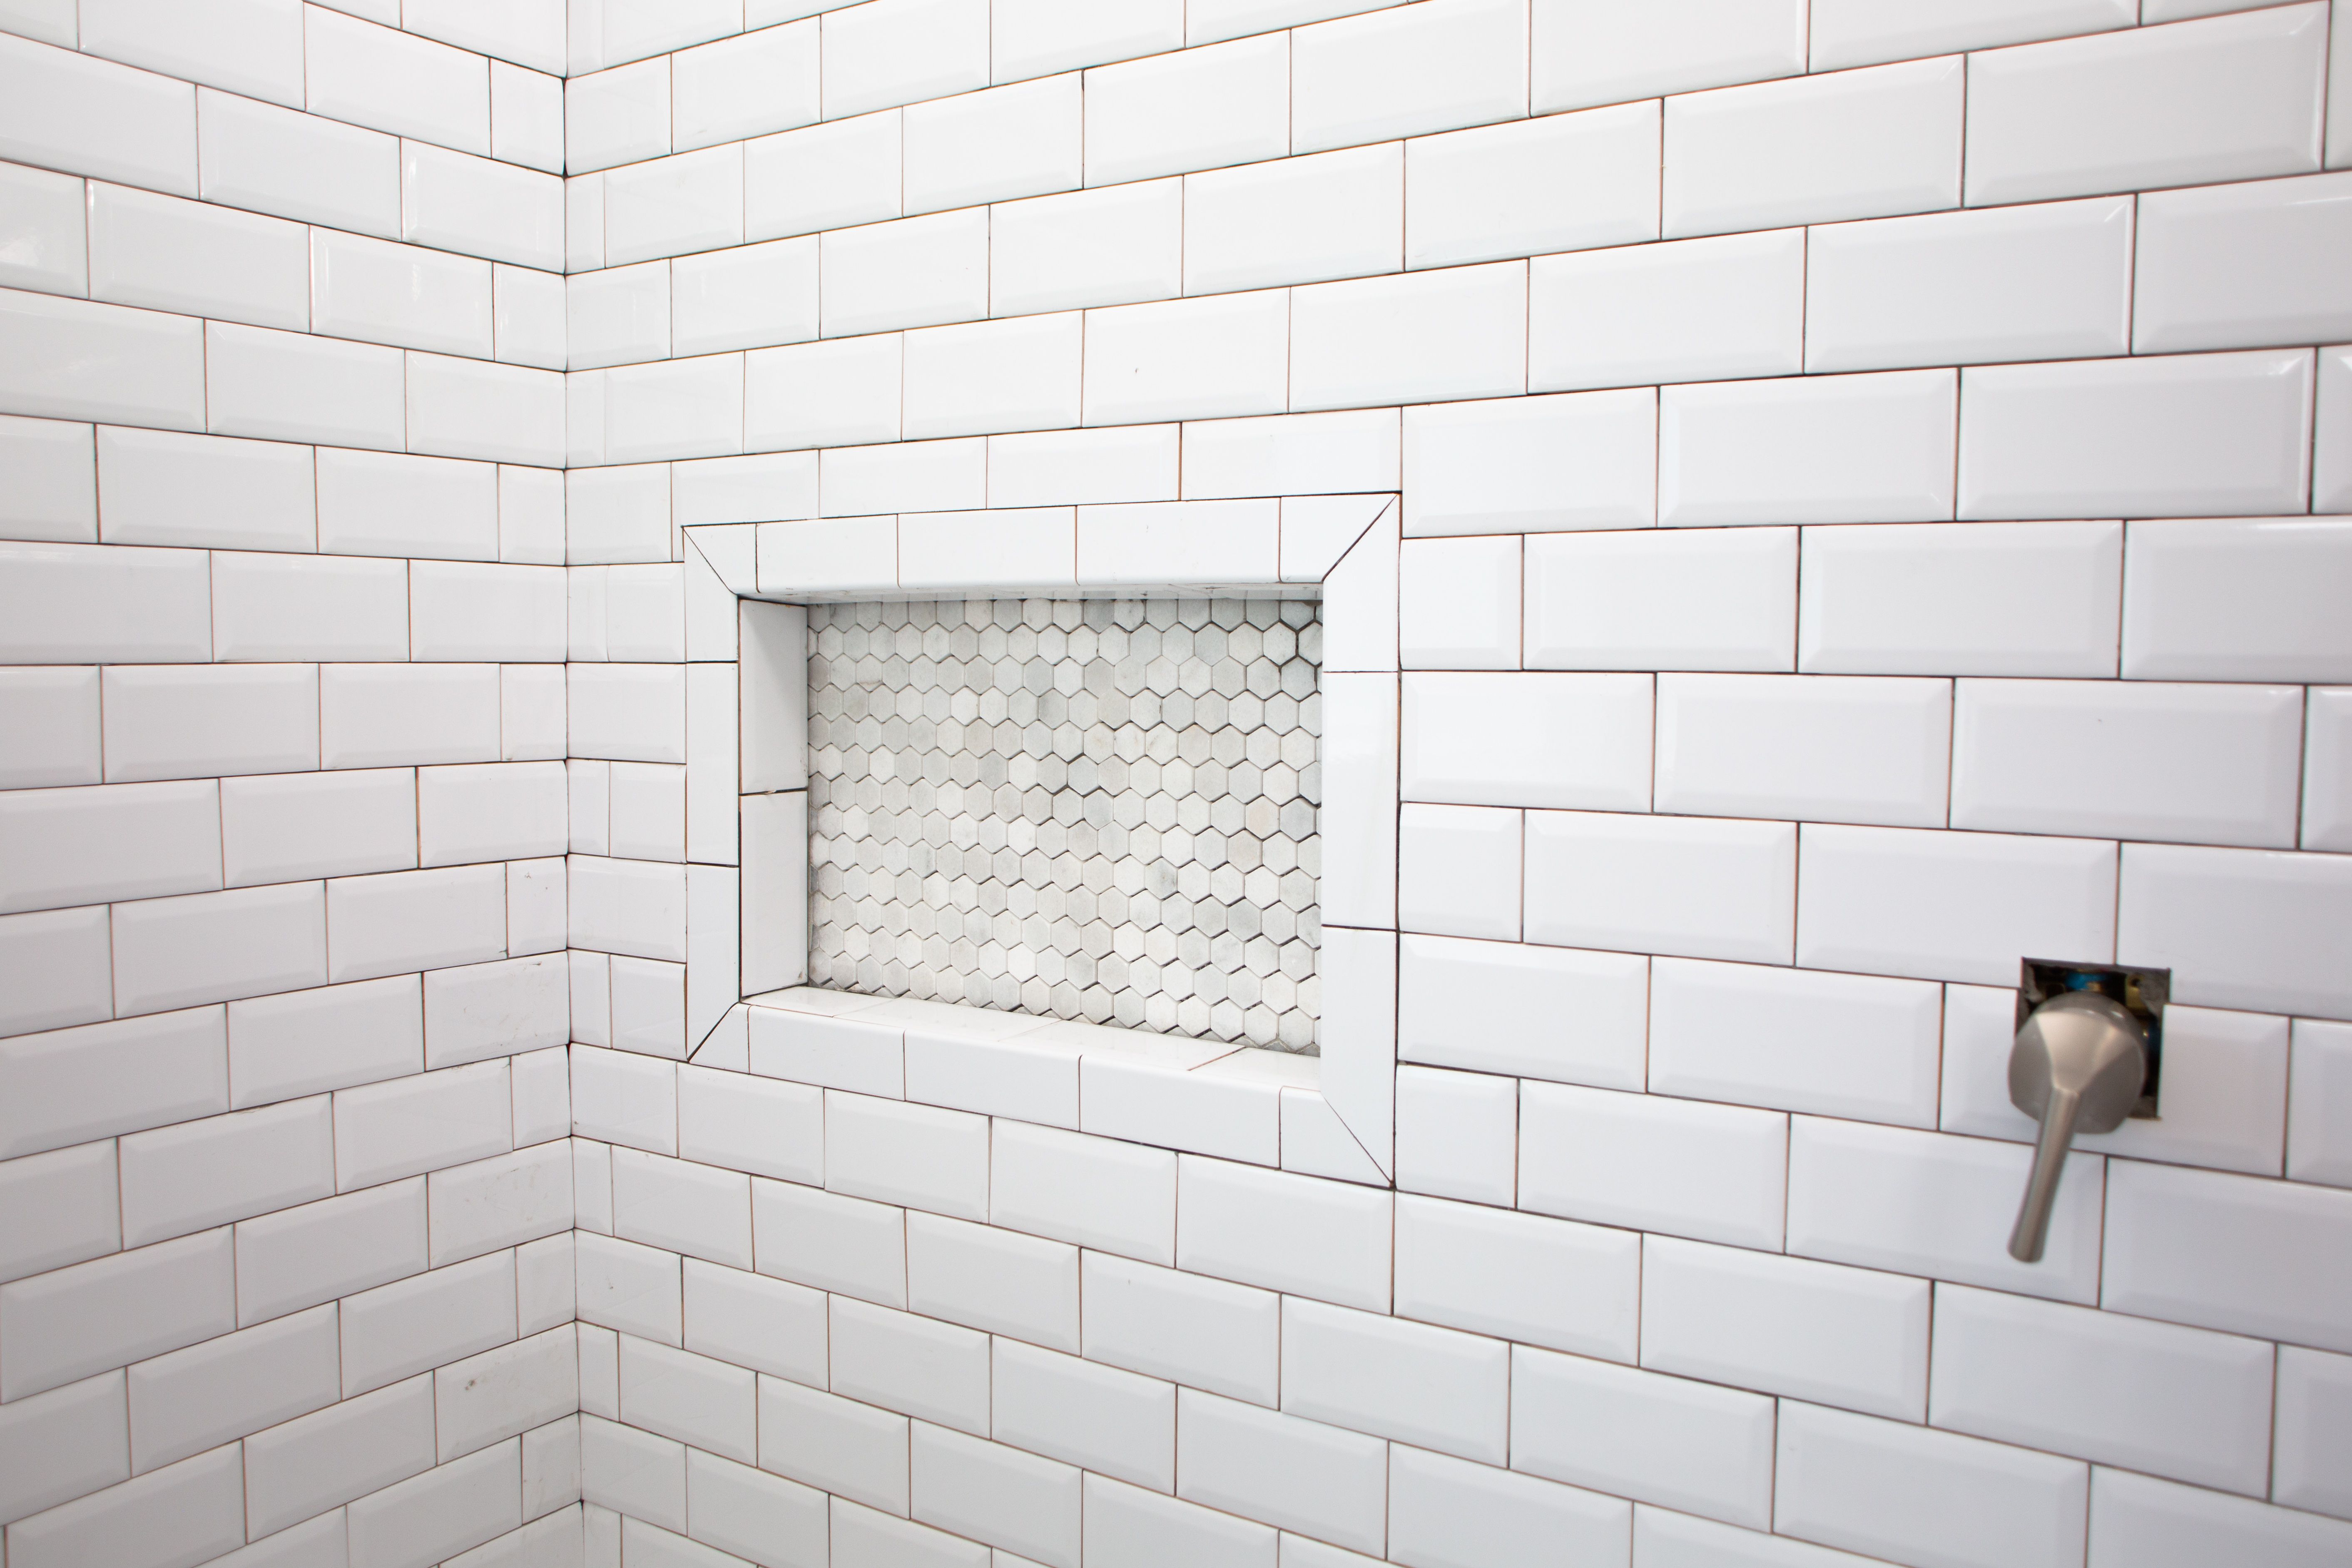 Does Ceramic Wall Tiles Really Live Up To The Hype?